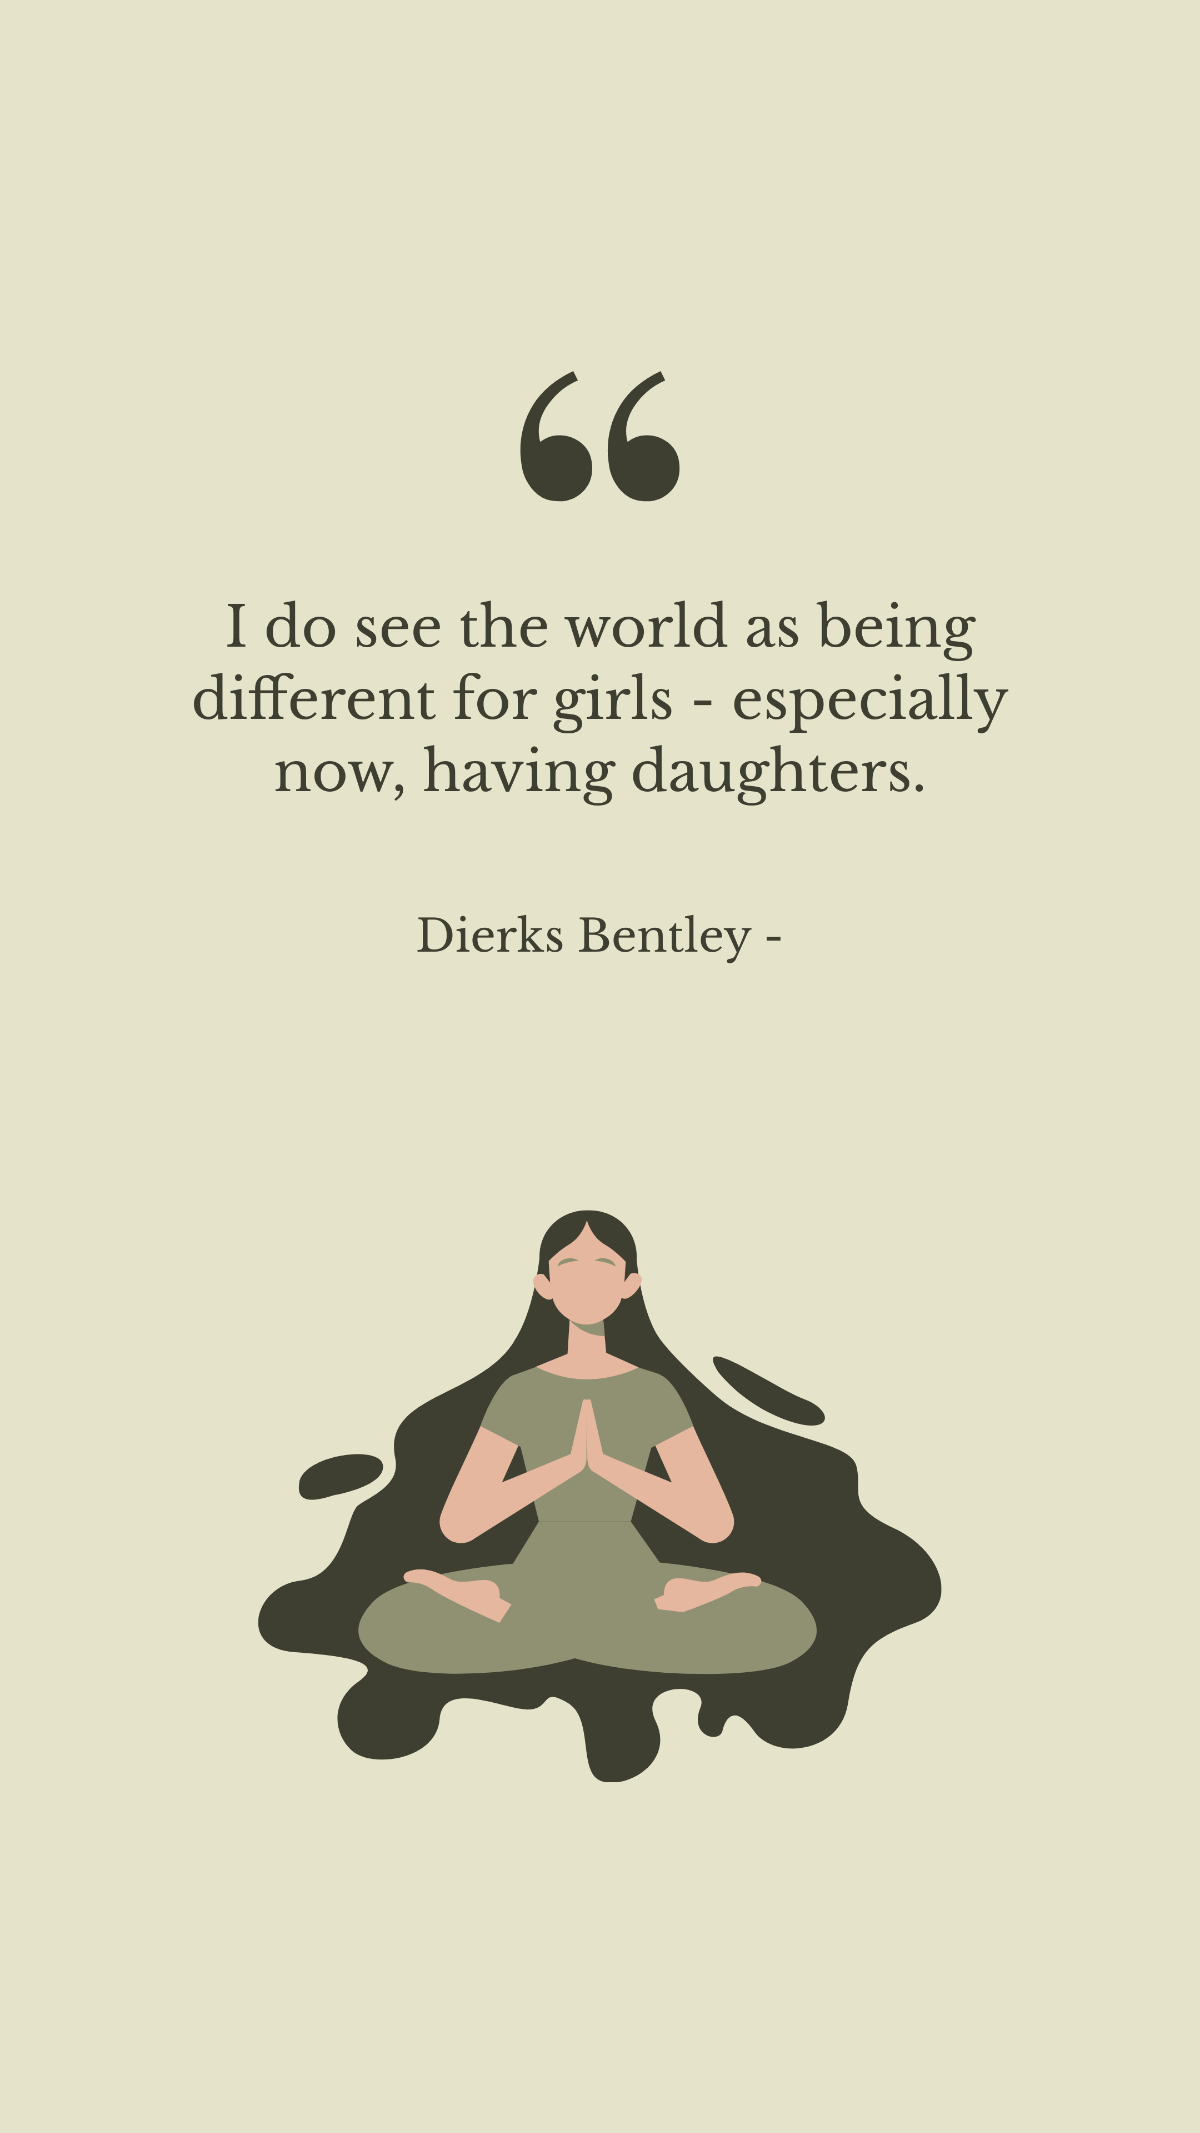 Free Dierks Bentley - I do see the world as being different for girls - especially now, having daughters. Template